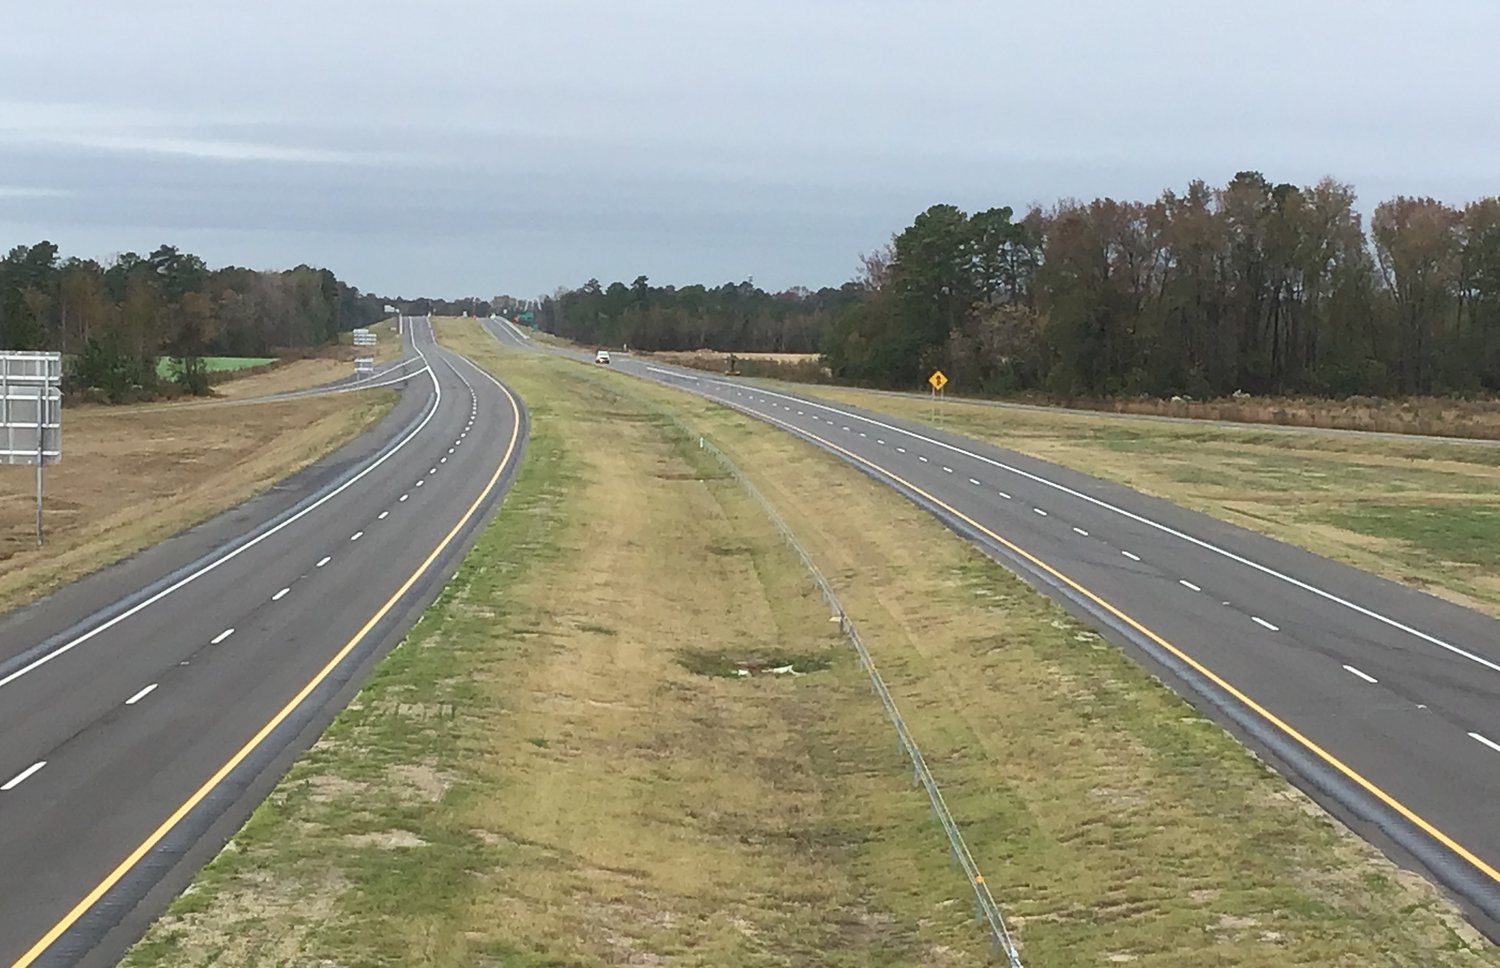 A new segment of the Fayetteville Outer loop opened to traffic Monday morning between Parkton and Black Bridge roads.